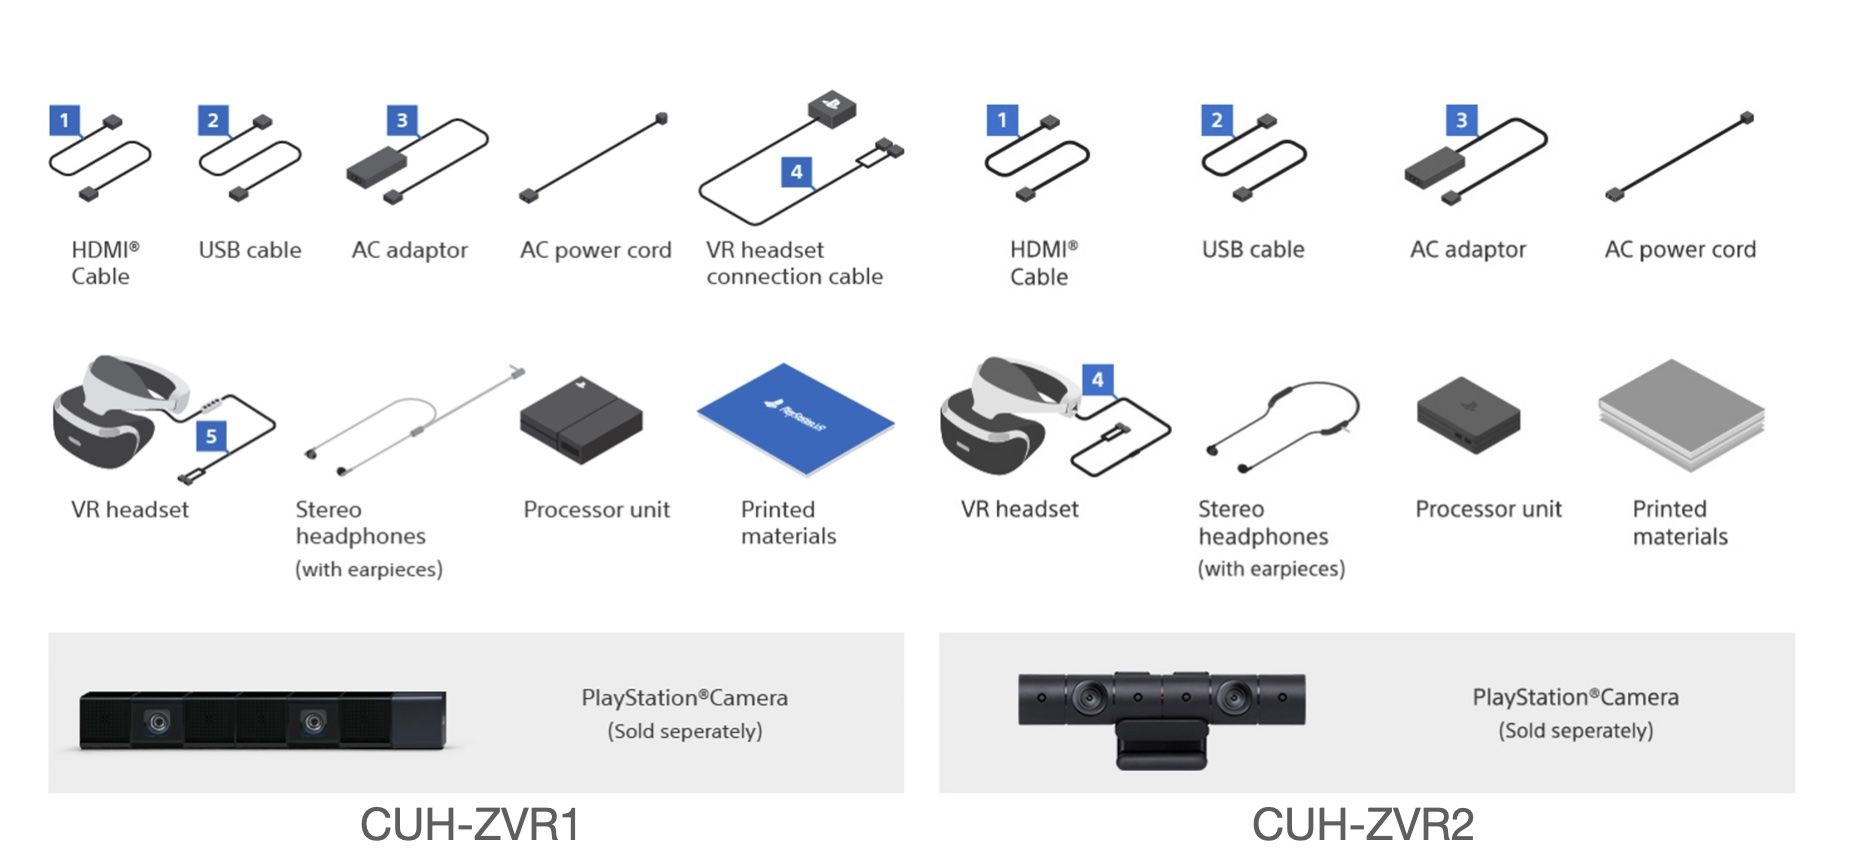 All components of the PlayStation VR